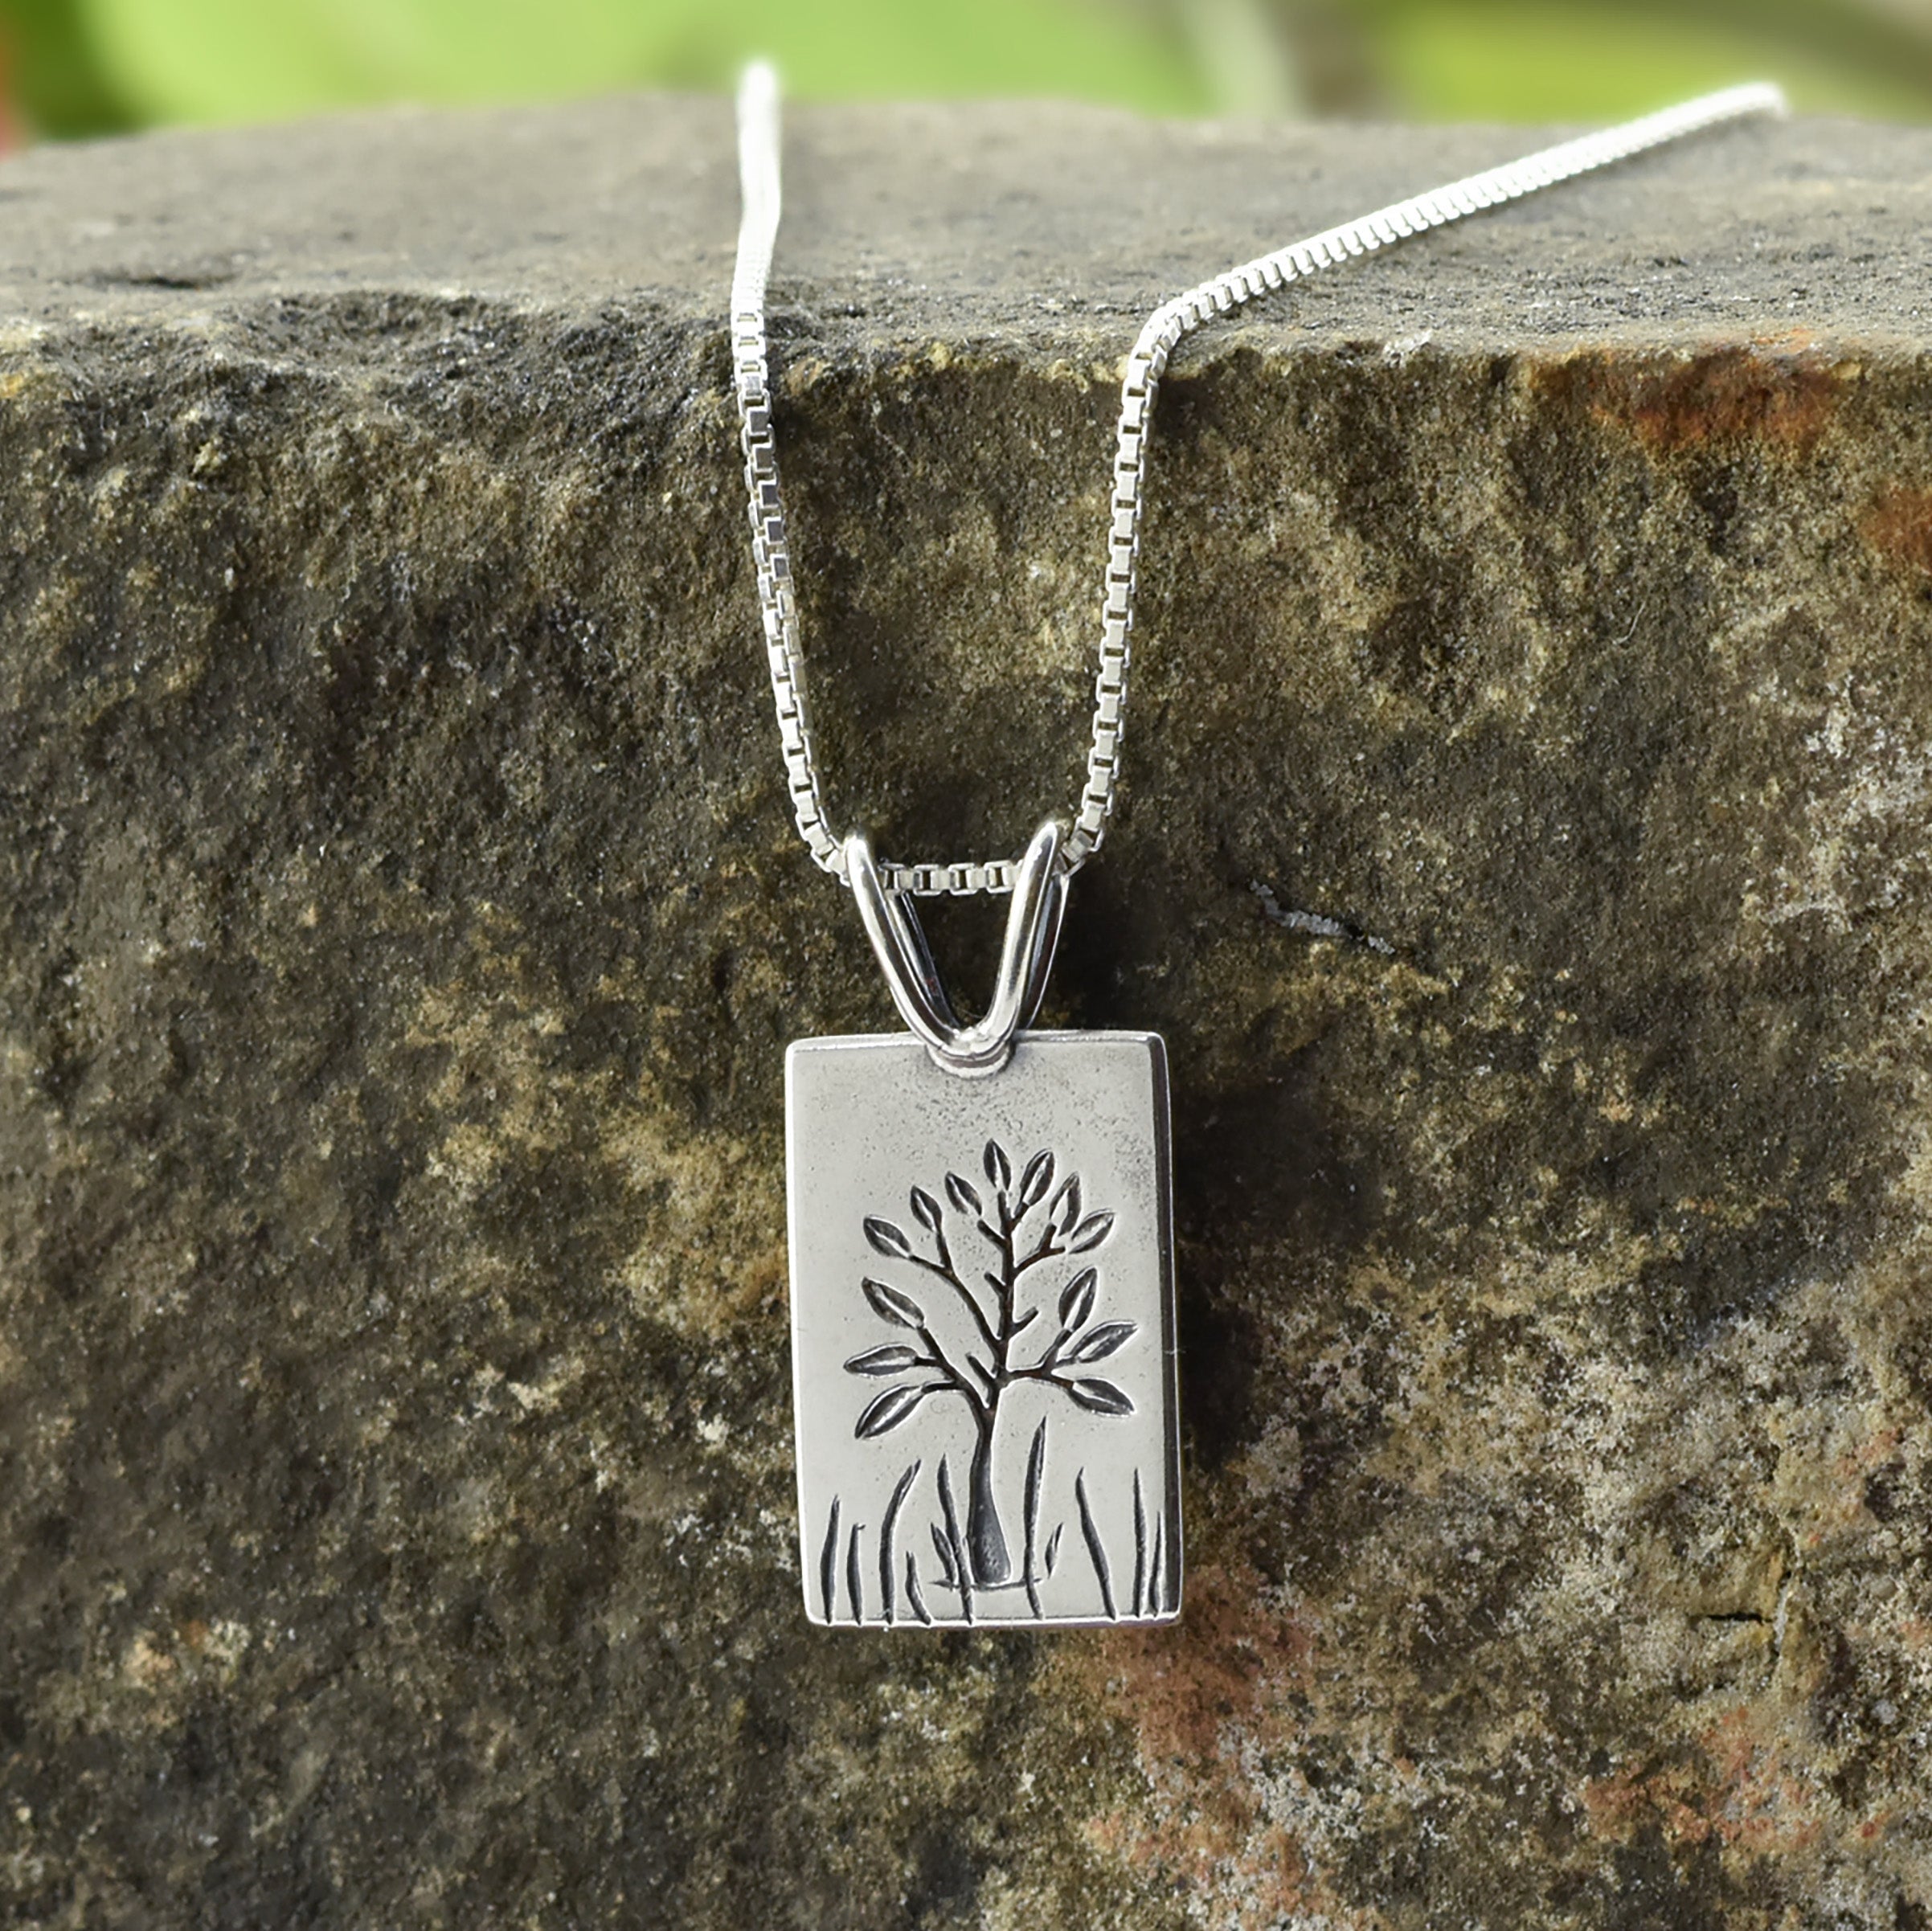 Reversible Small Solstice Tree Pendant - Silver Pendant   7097 - handmade by Beth Millner Jewelry